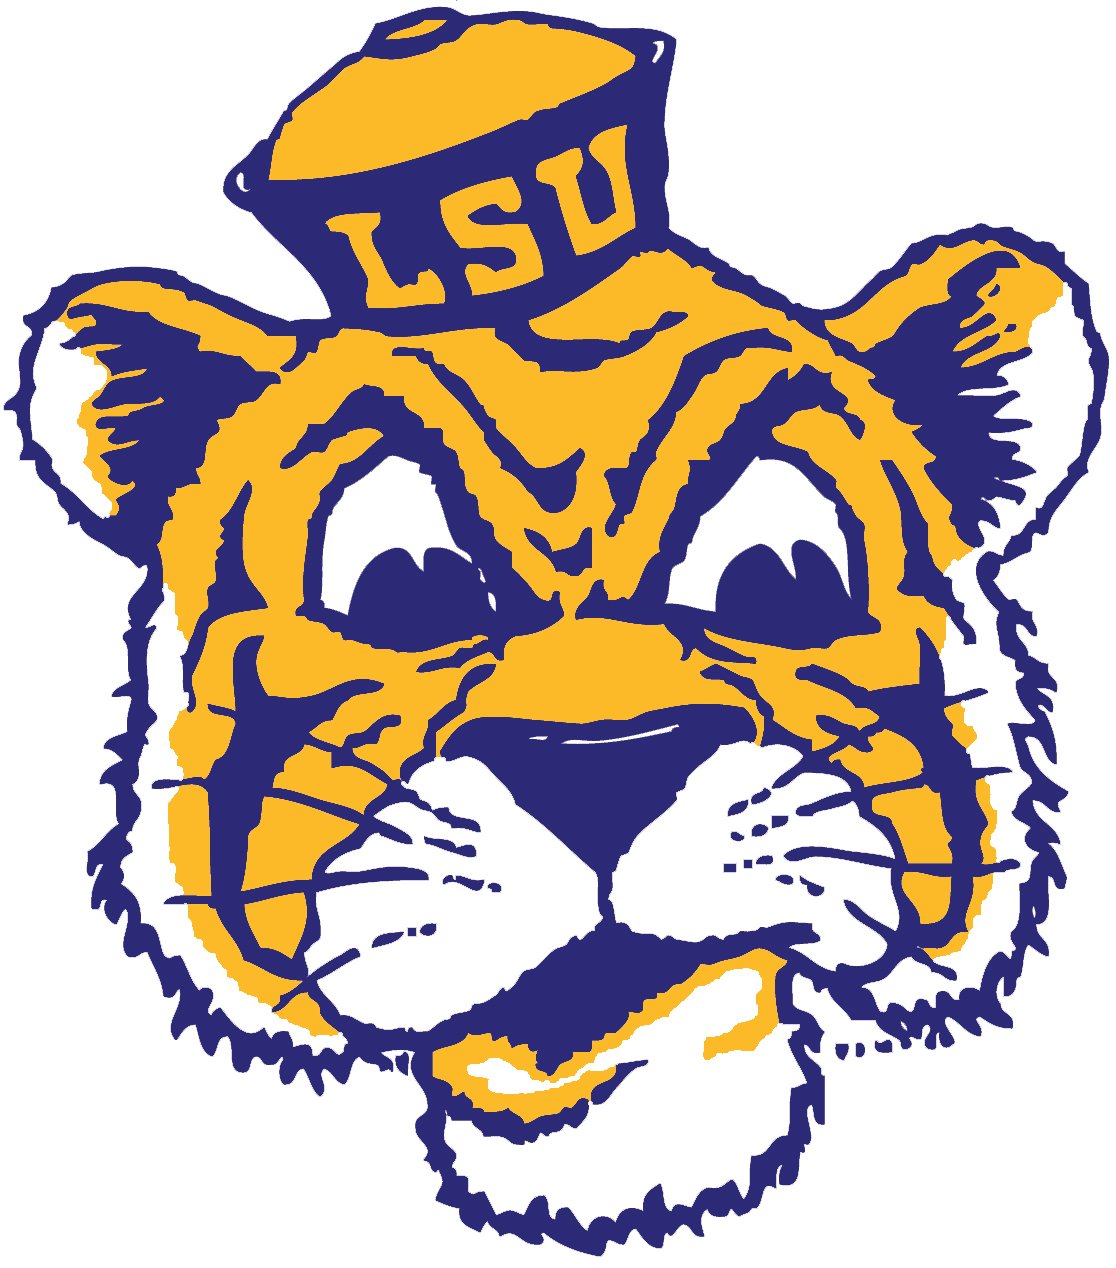 Free Lsu Mascot Pictures, Download Free Clip Art, Free Clip.